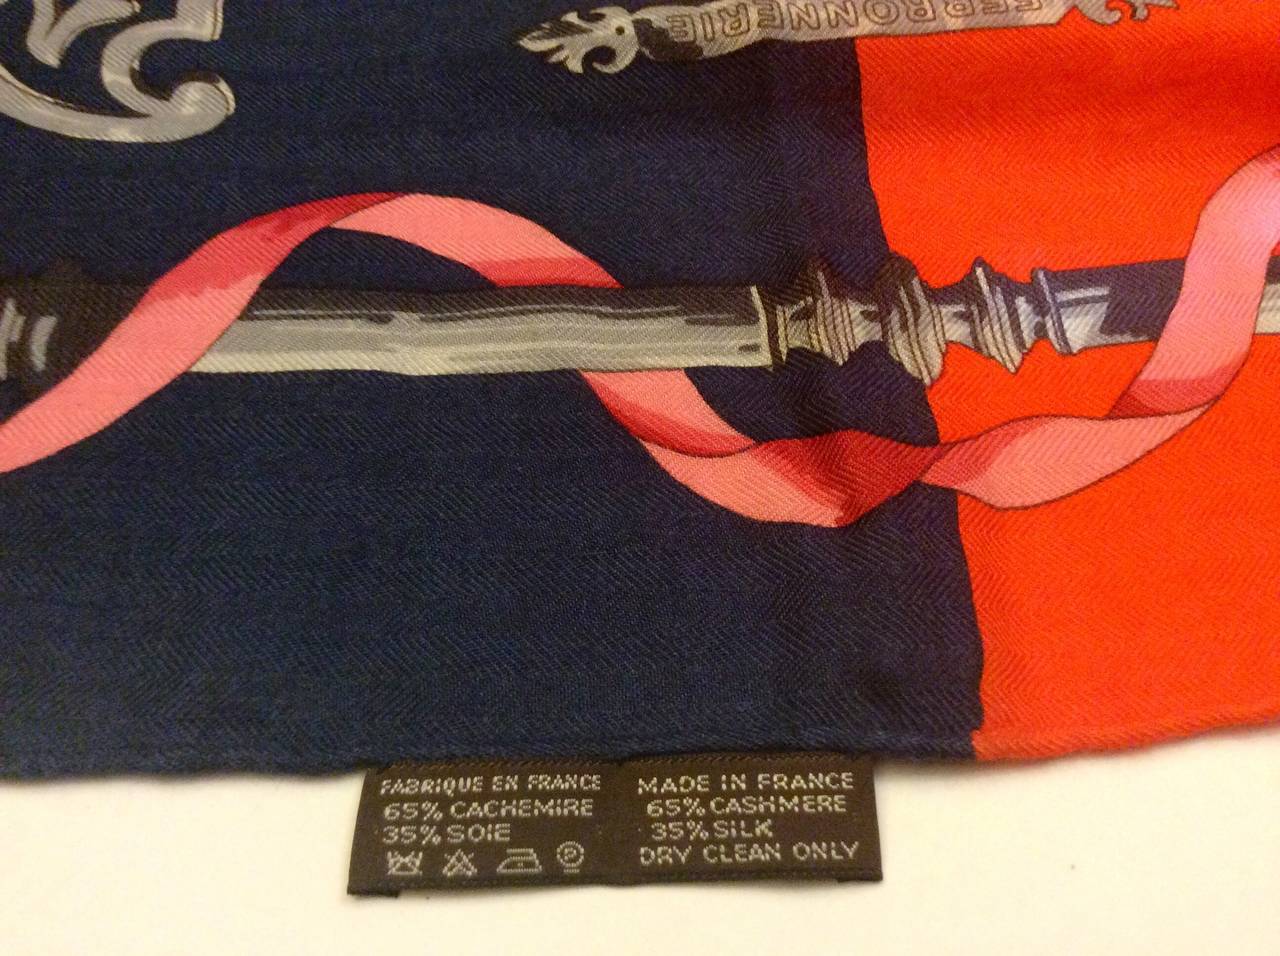 Hermes Paris Vibrant Cashmere & Silk Scarf Wrap Shawl GM In Excellent Condition For Sale In Lake Park, FL